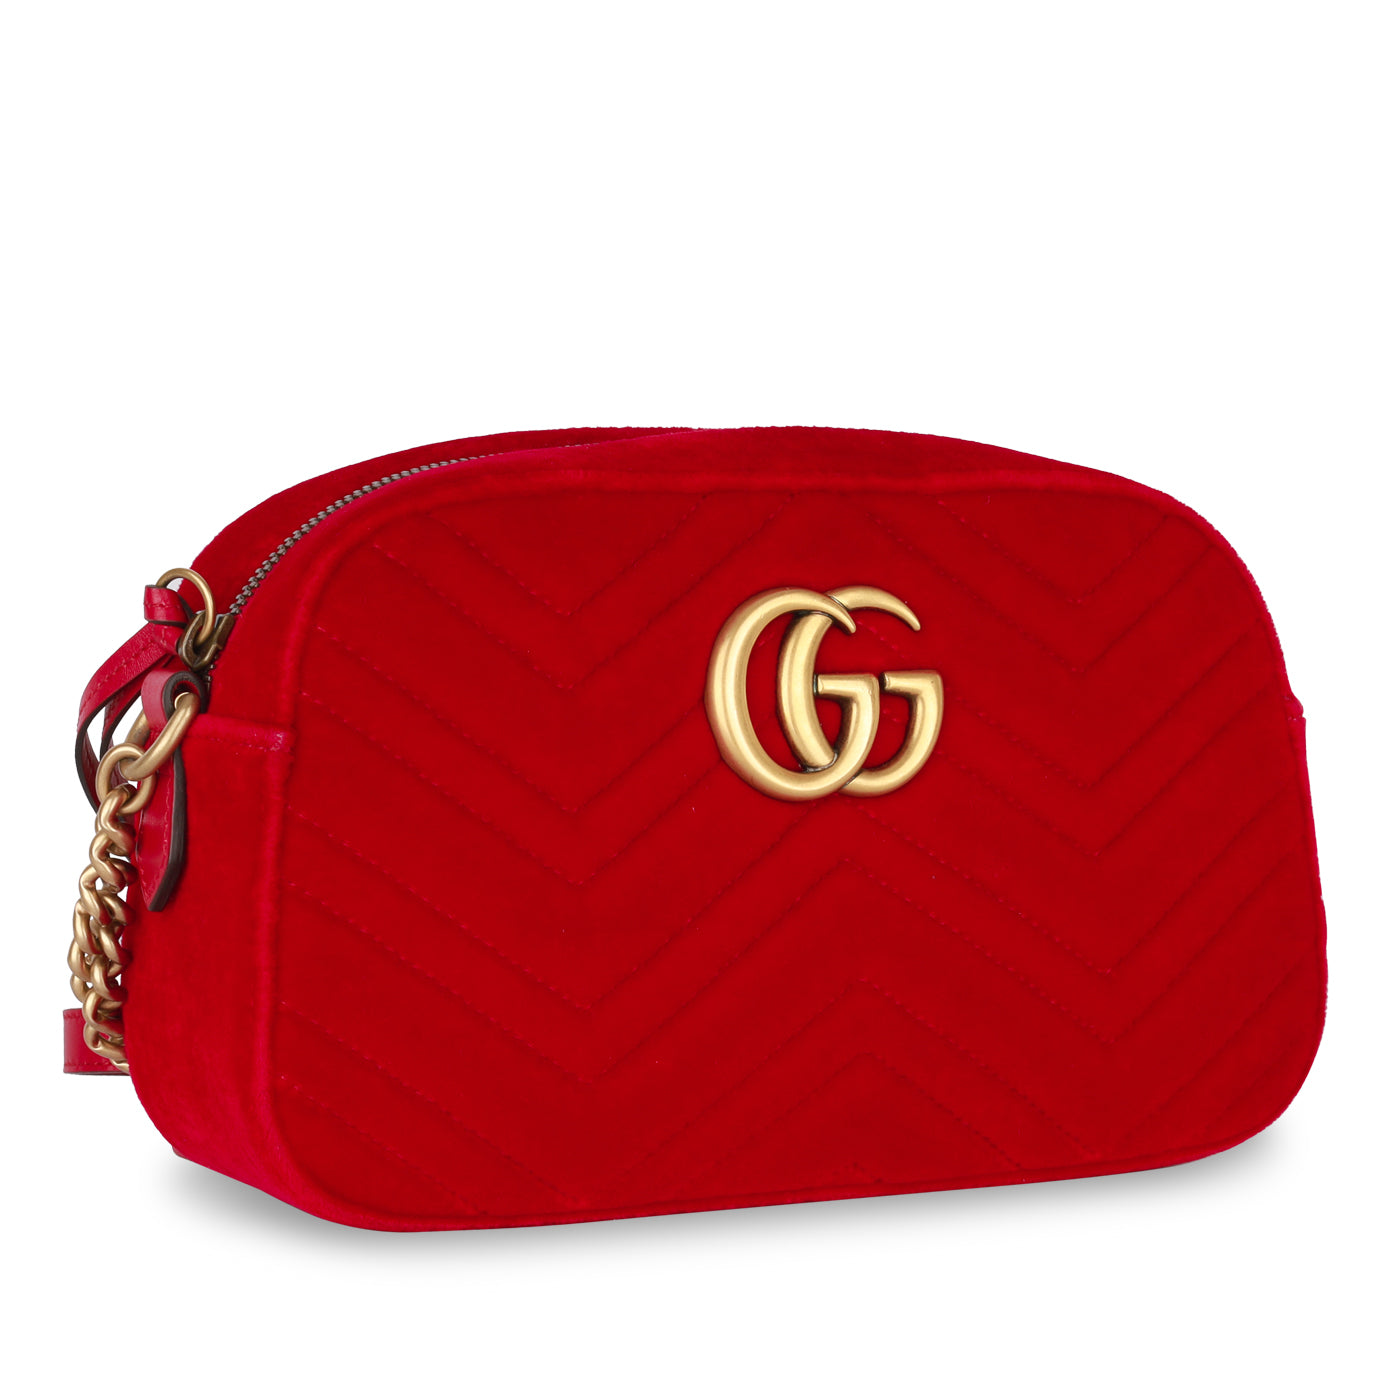 Gucci - Small Marmont Bag - Red Velvet - GHW - Pre Loved